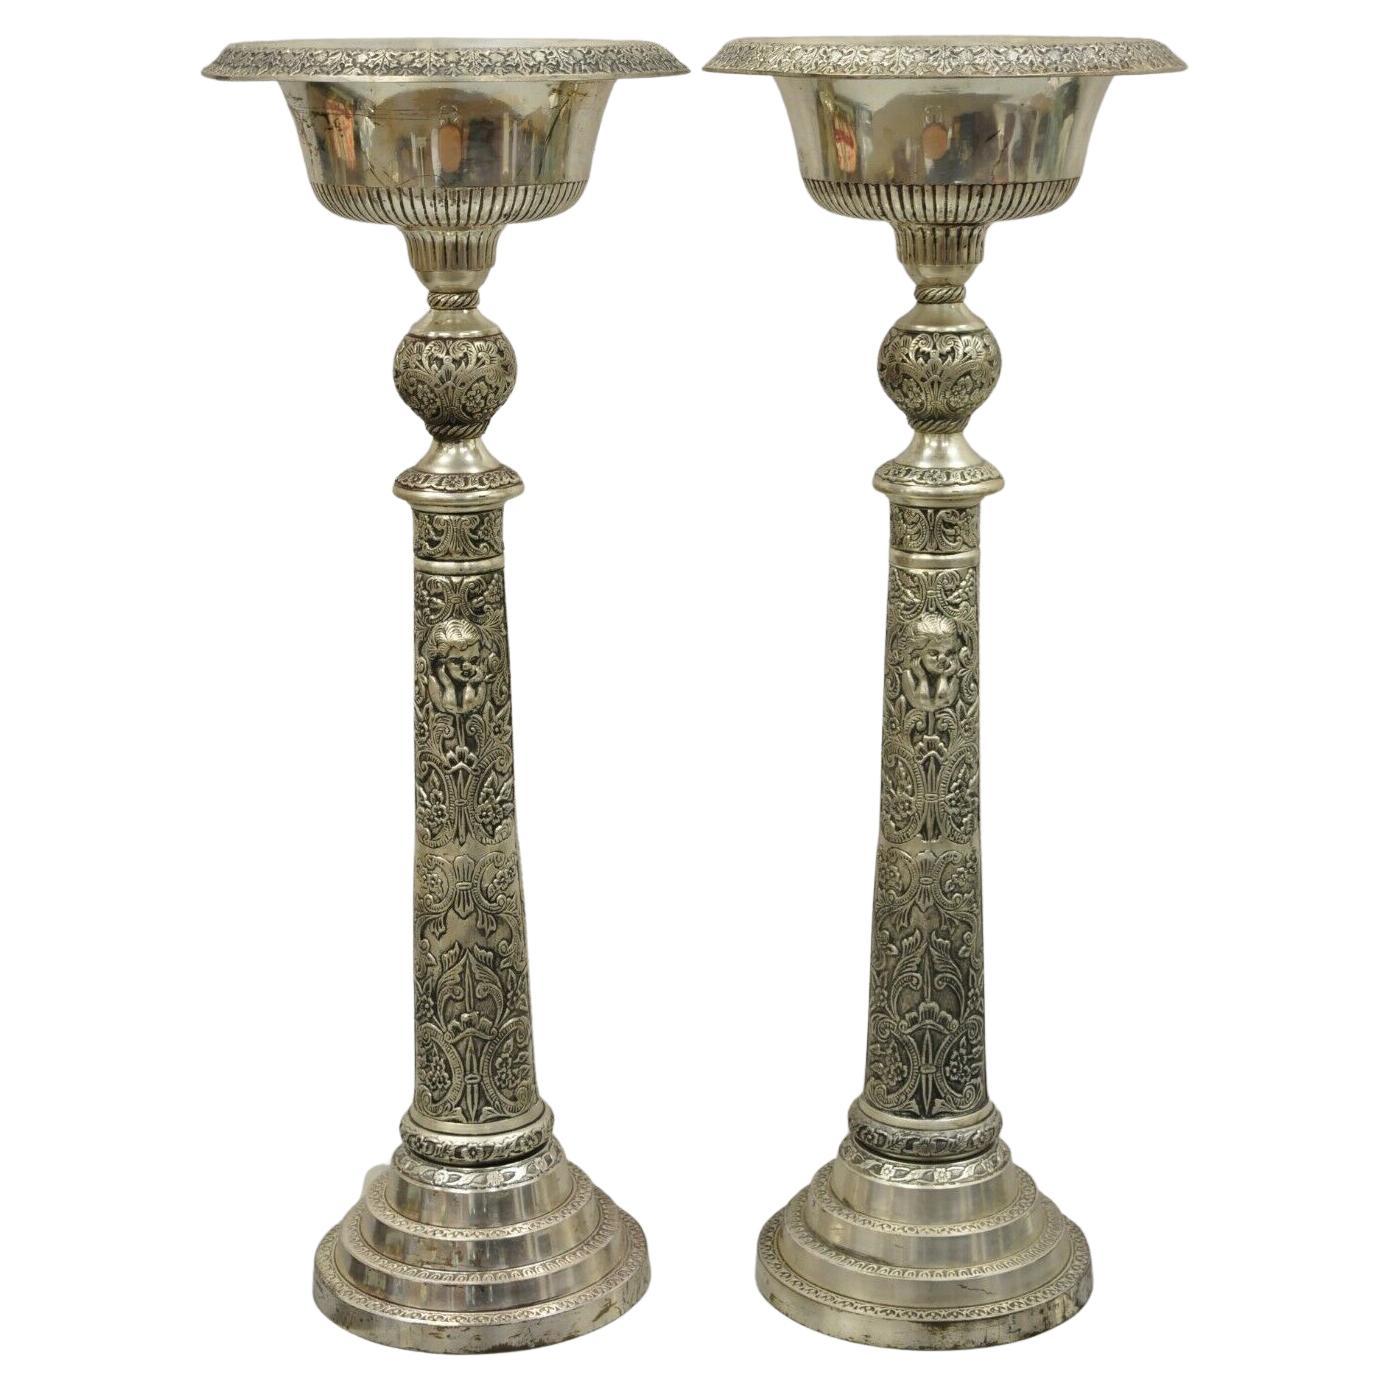 Silver Plated Metal Tall Ornate French Style Compote Centerpiece, a Pair For Sale